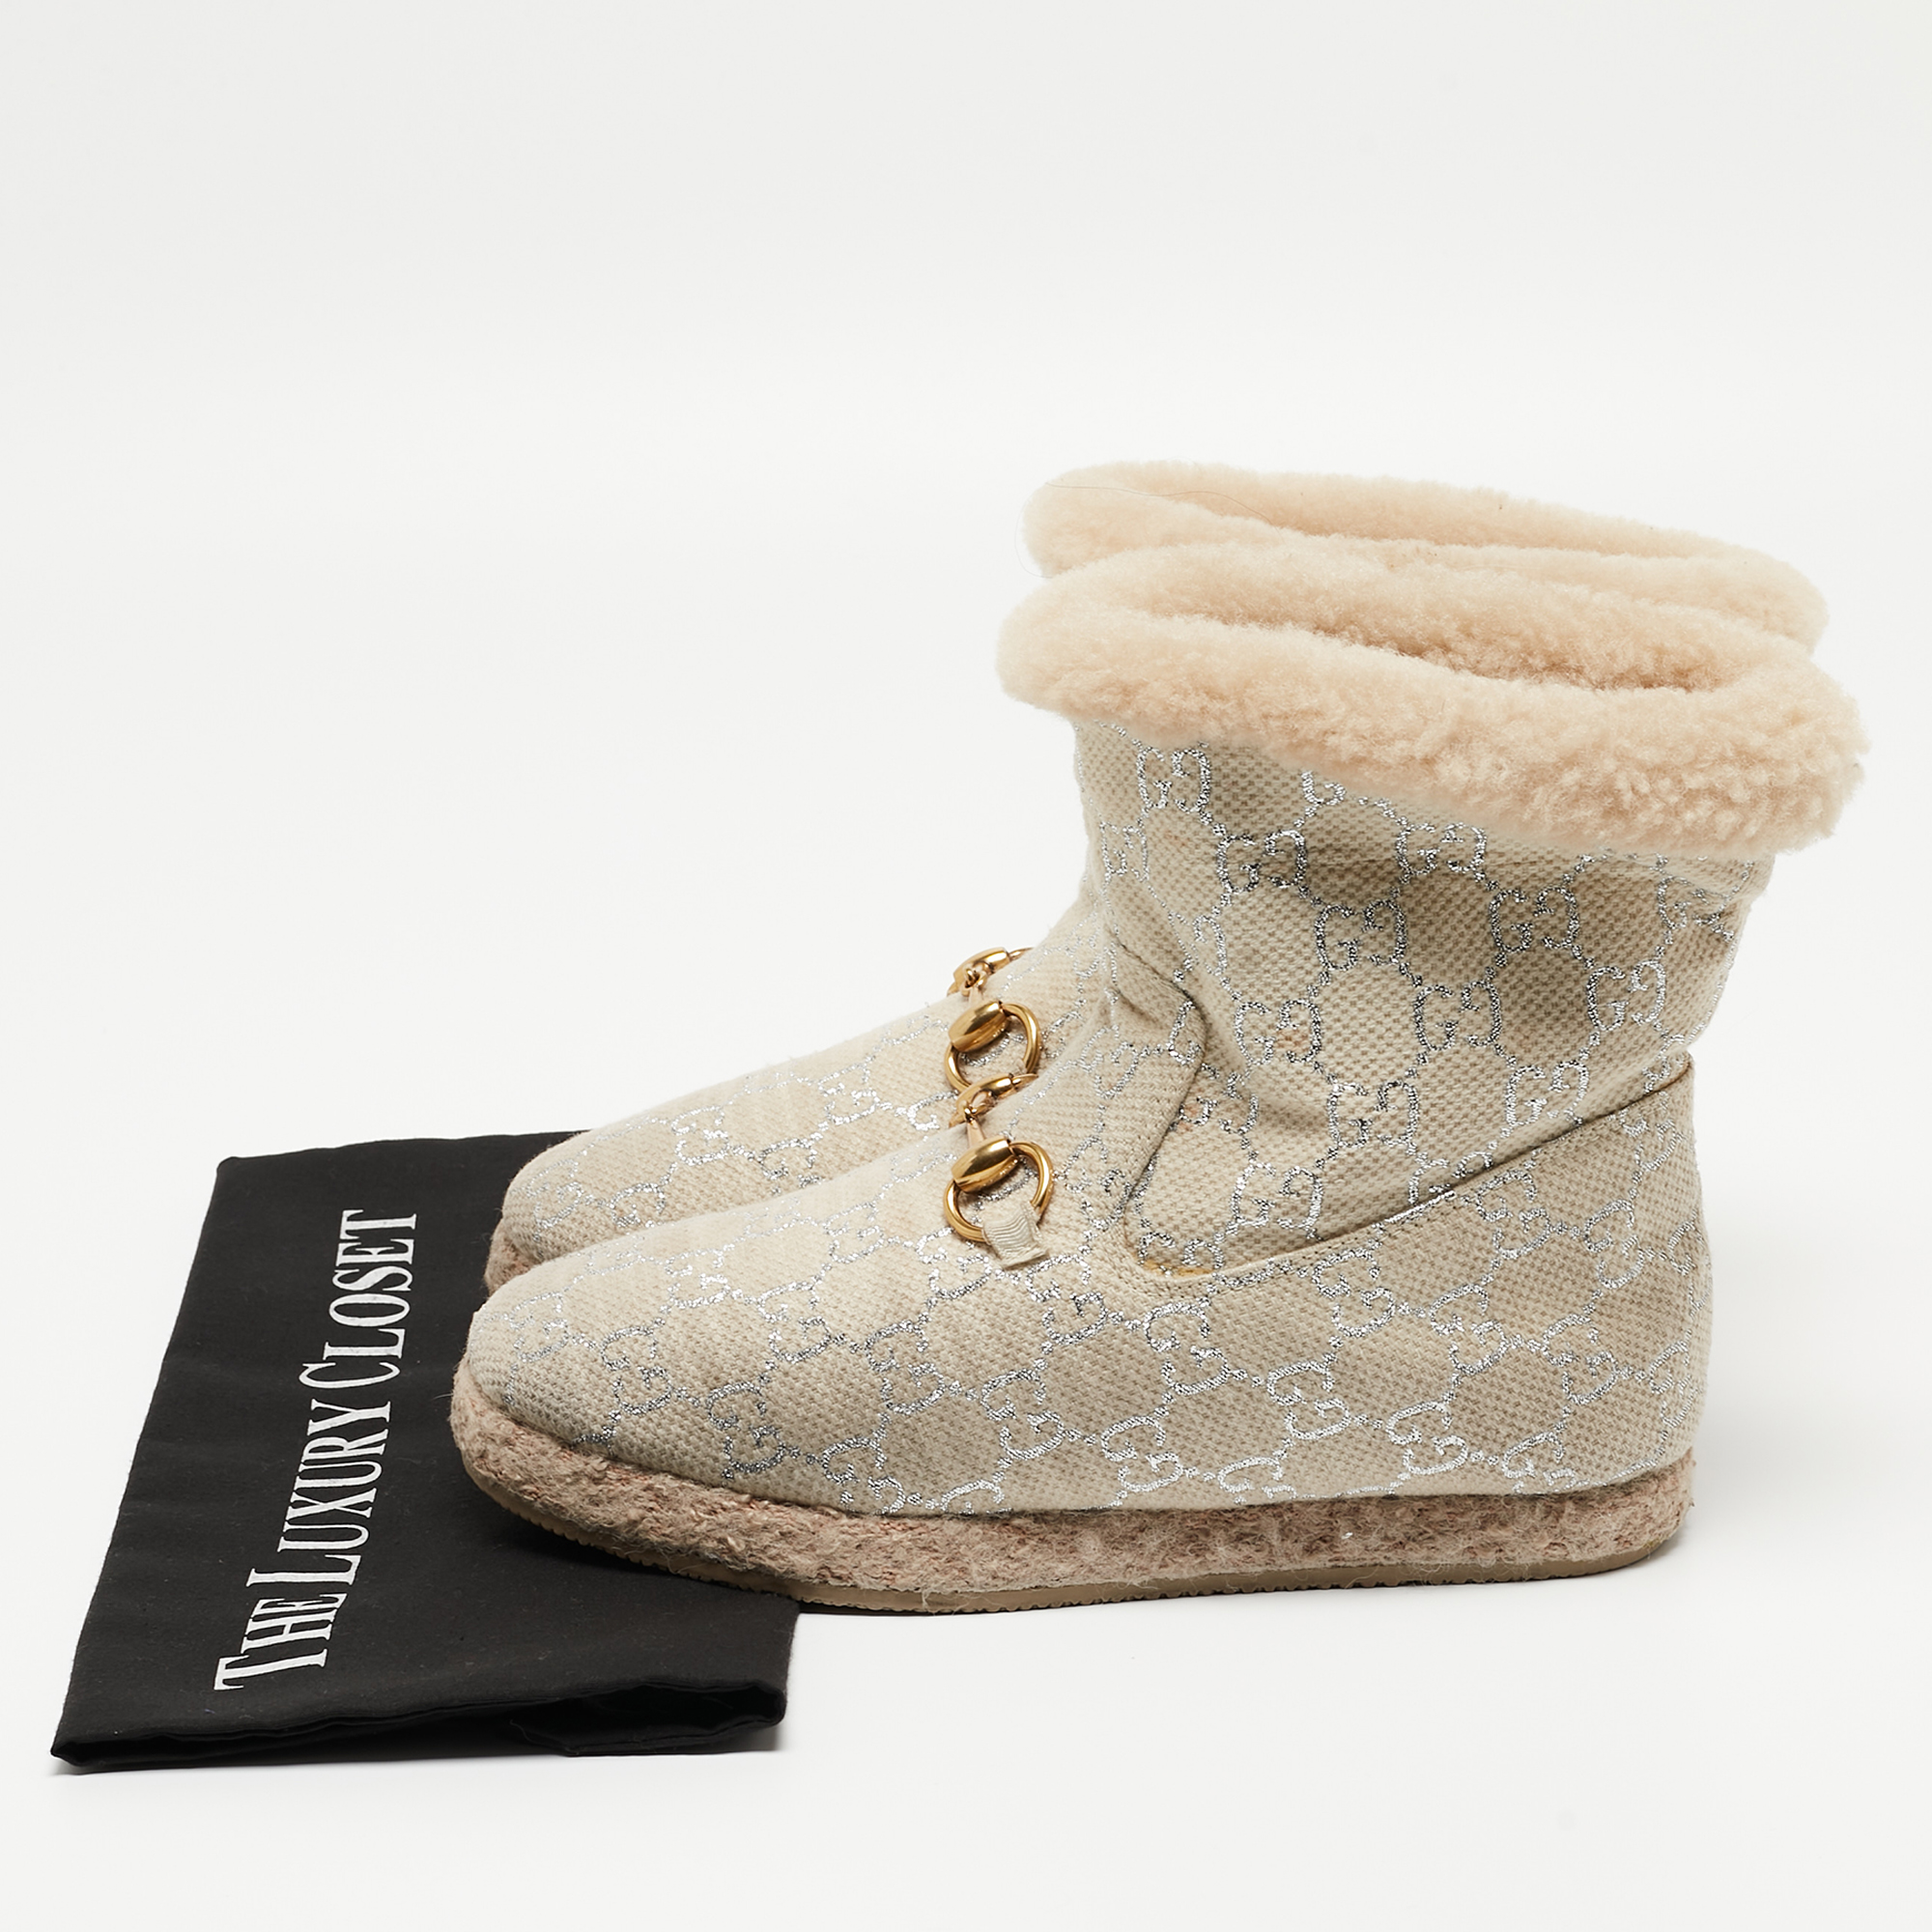 Gucci Beige Canvas And Fur Fria Horsebit Ankle Boots Size 37